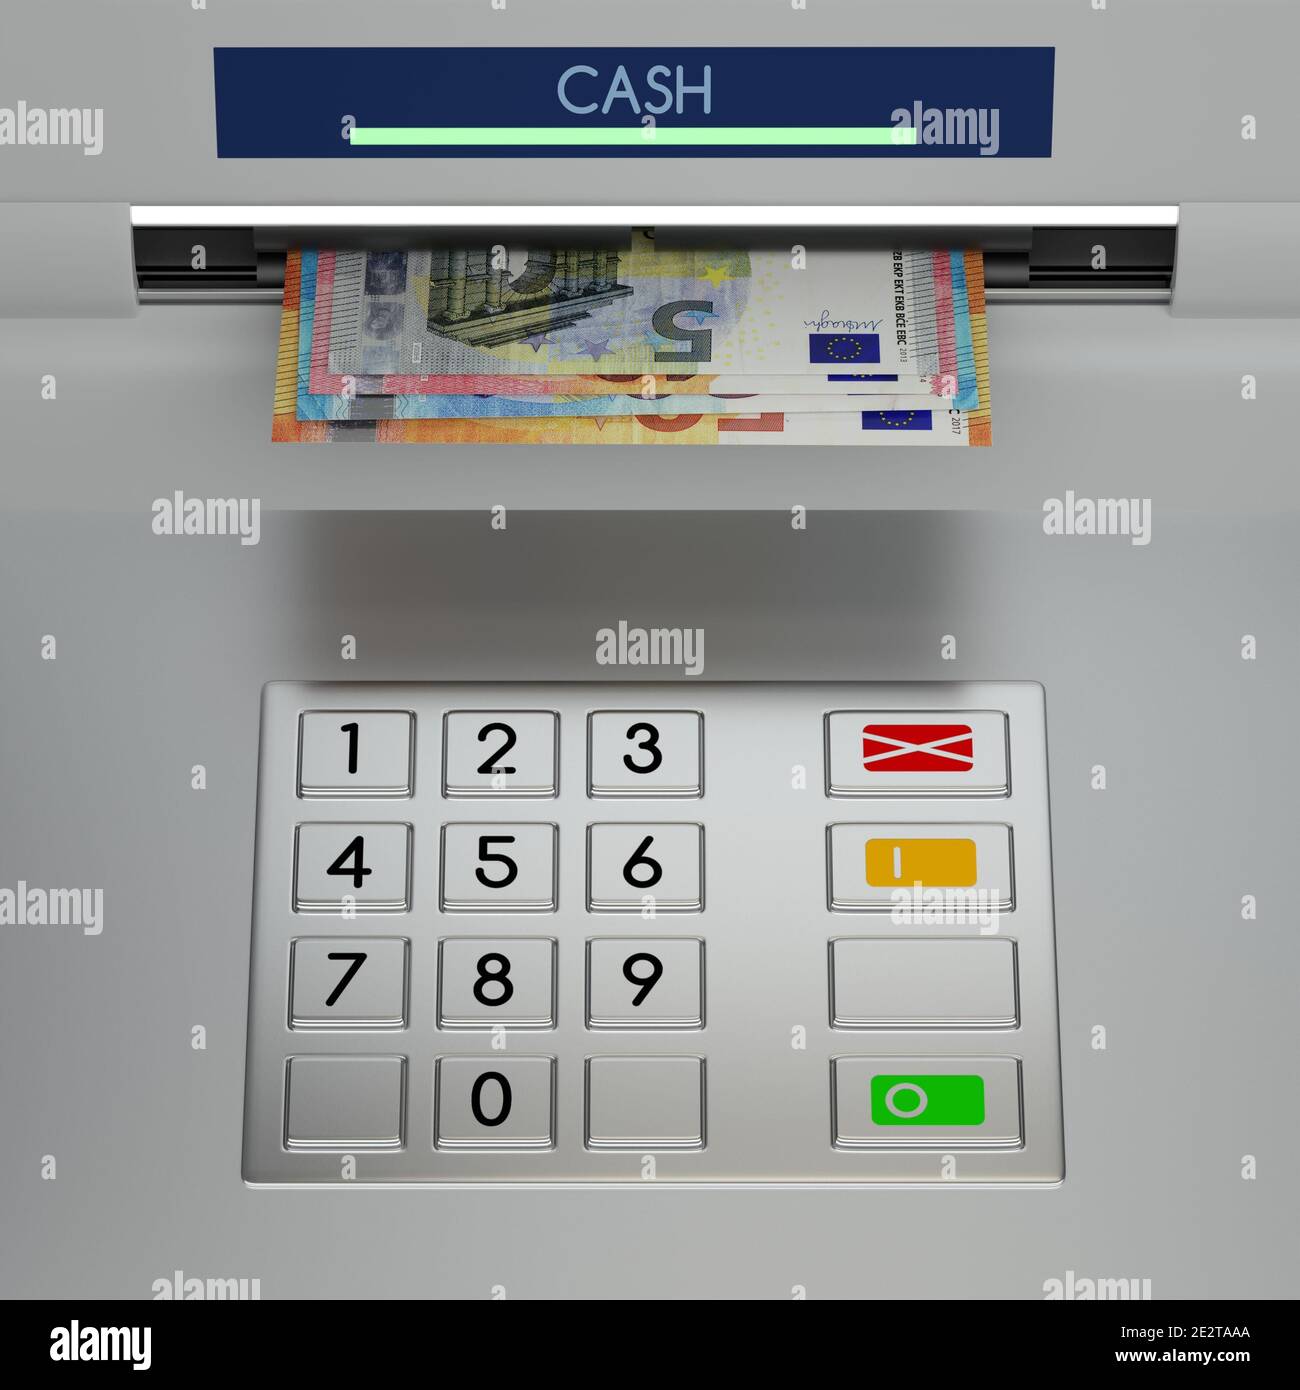 Atm machine keypad with euro banknotes in the money slot. Password security, online payment, cash withdrawal deposit, transfer funds, giving money ret Stock Photo